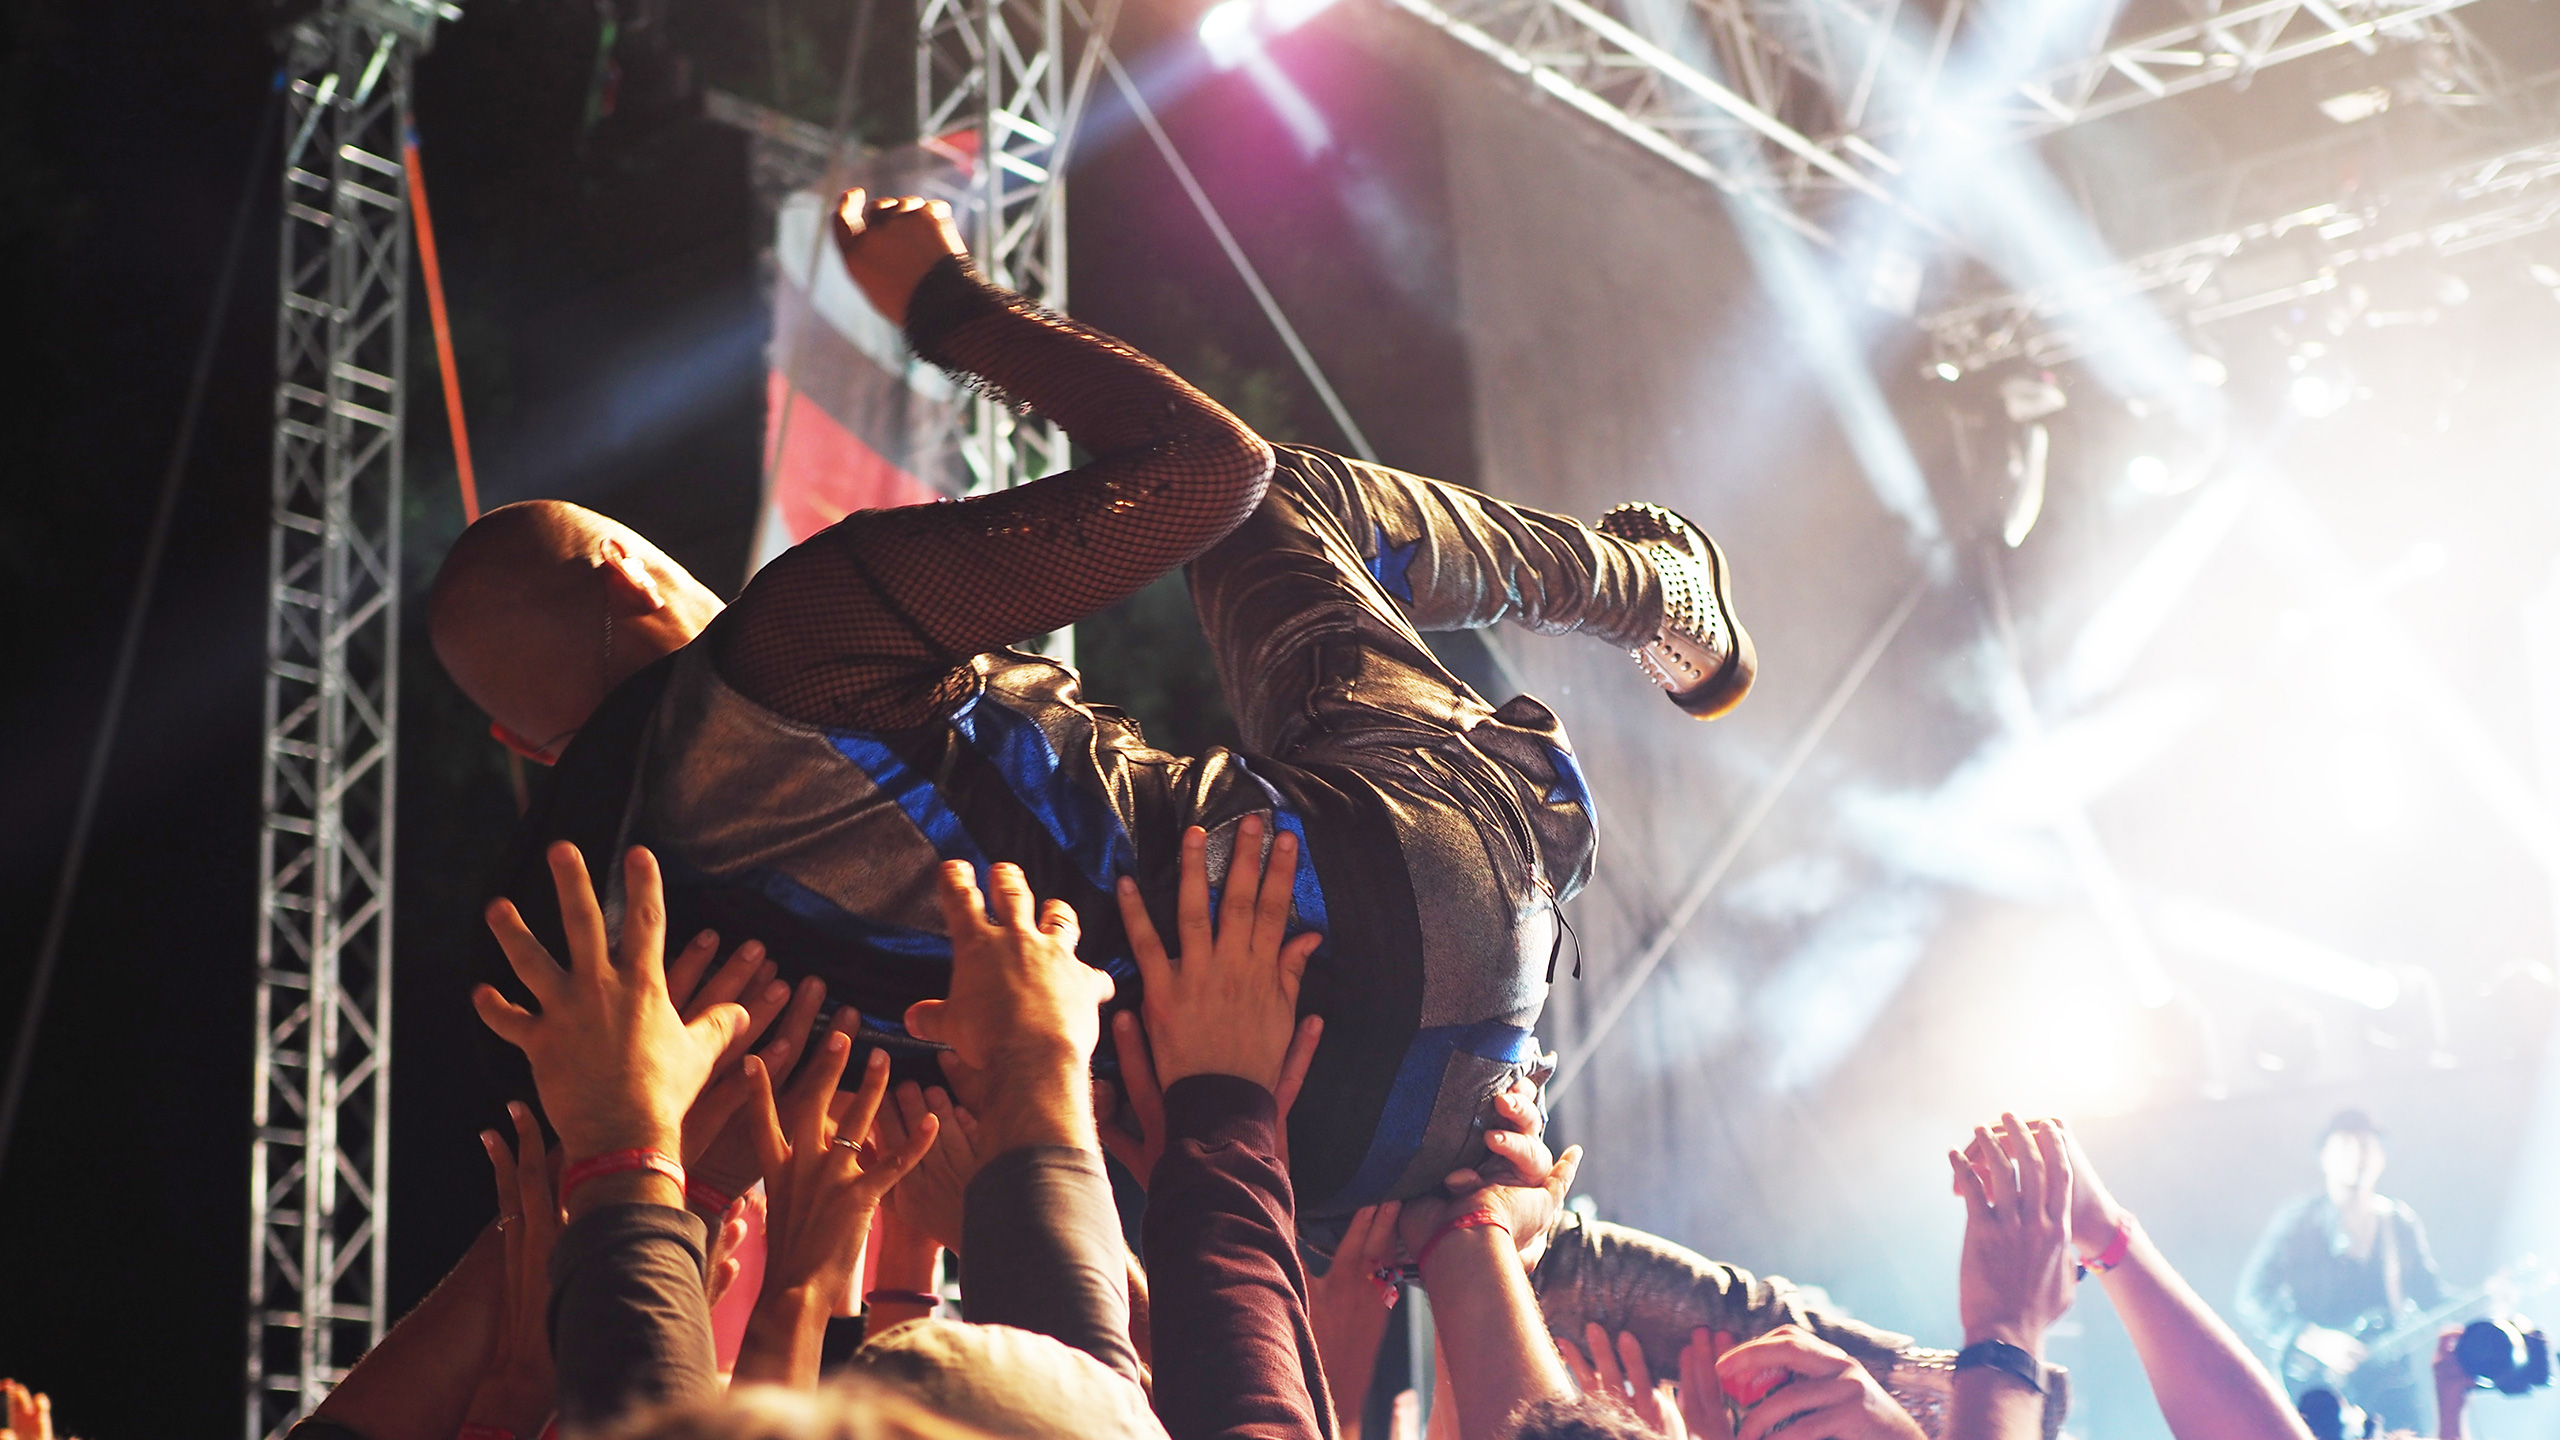 Crowd surfing at a gig